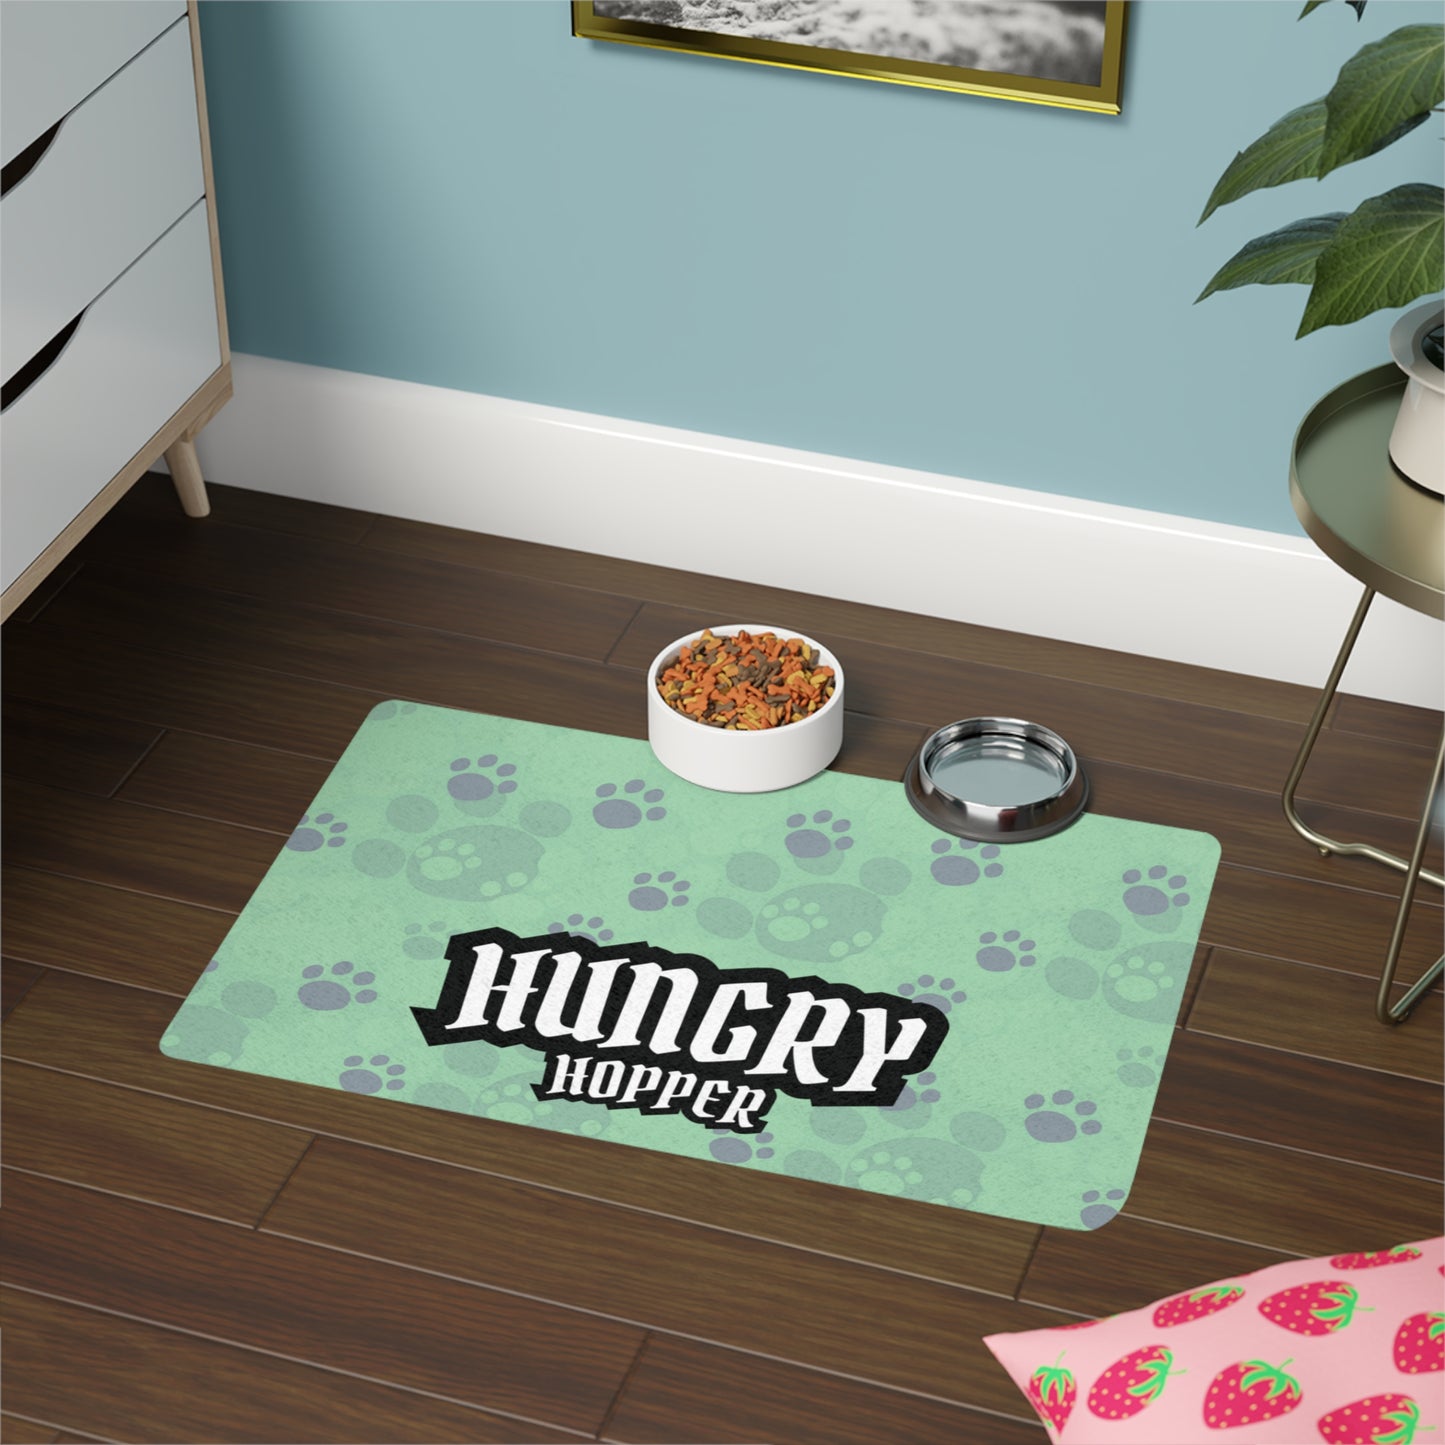 Personalized Pet Bowl Mat - Hungry Blue